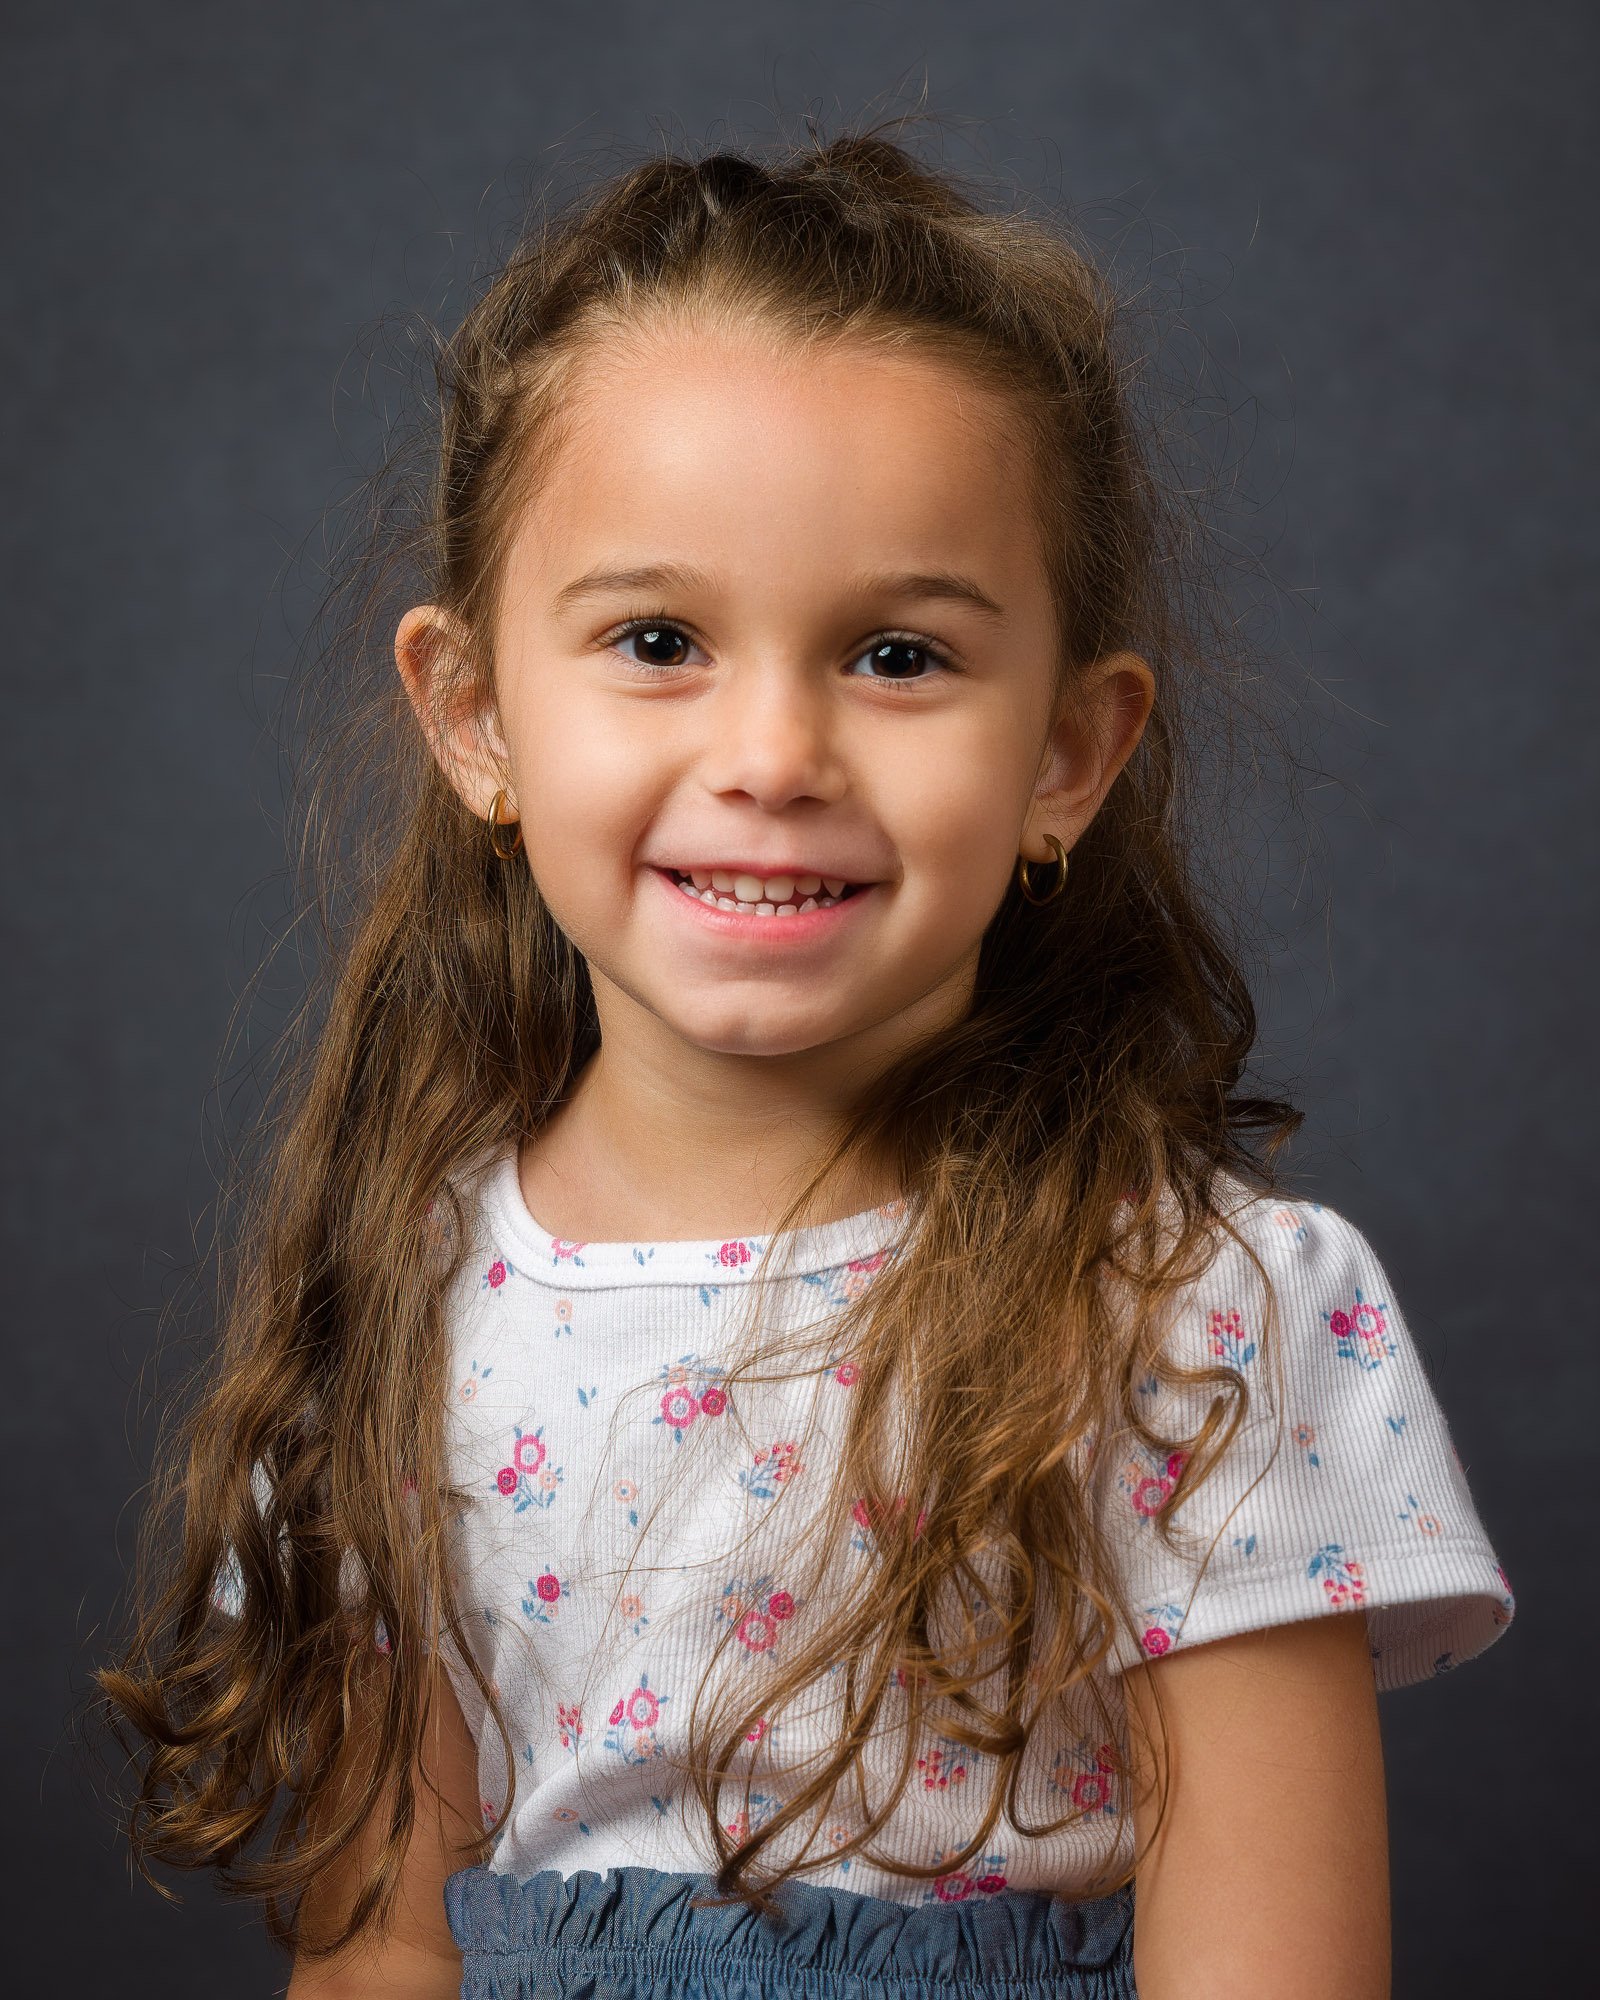 The Complete Guide on What to Wear for School Photos — Brian Ackin ...